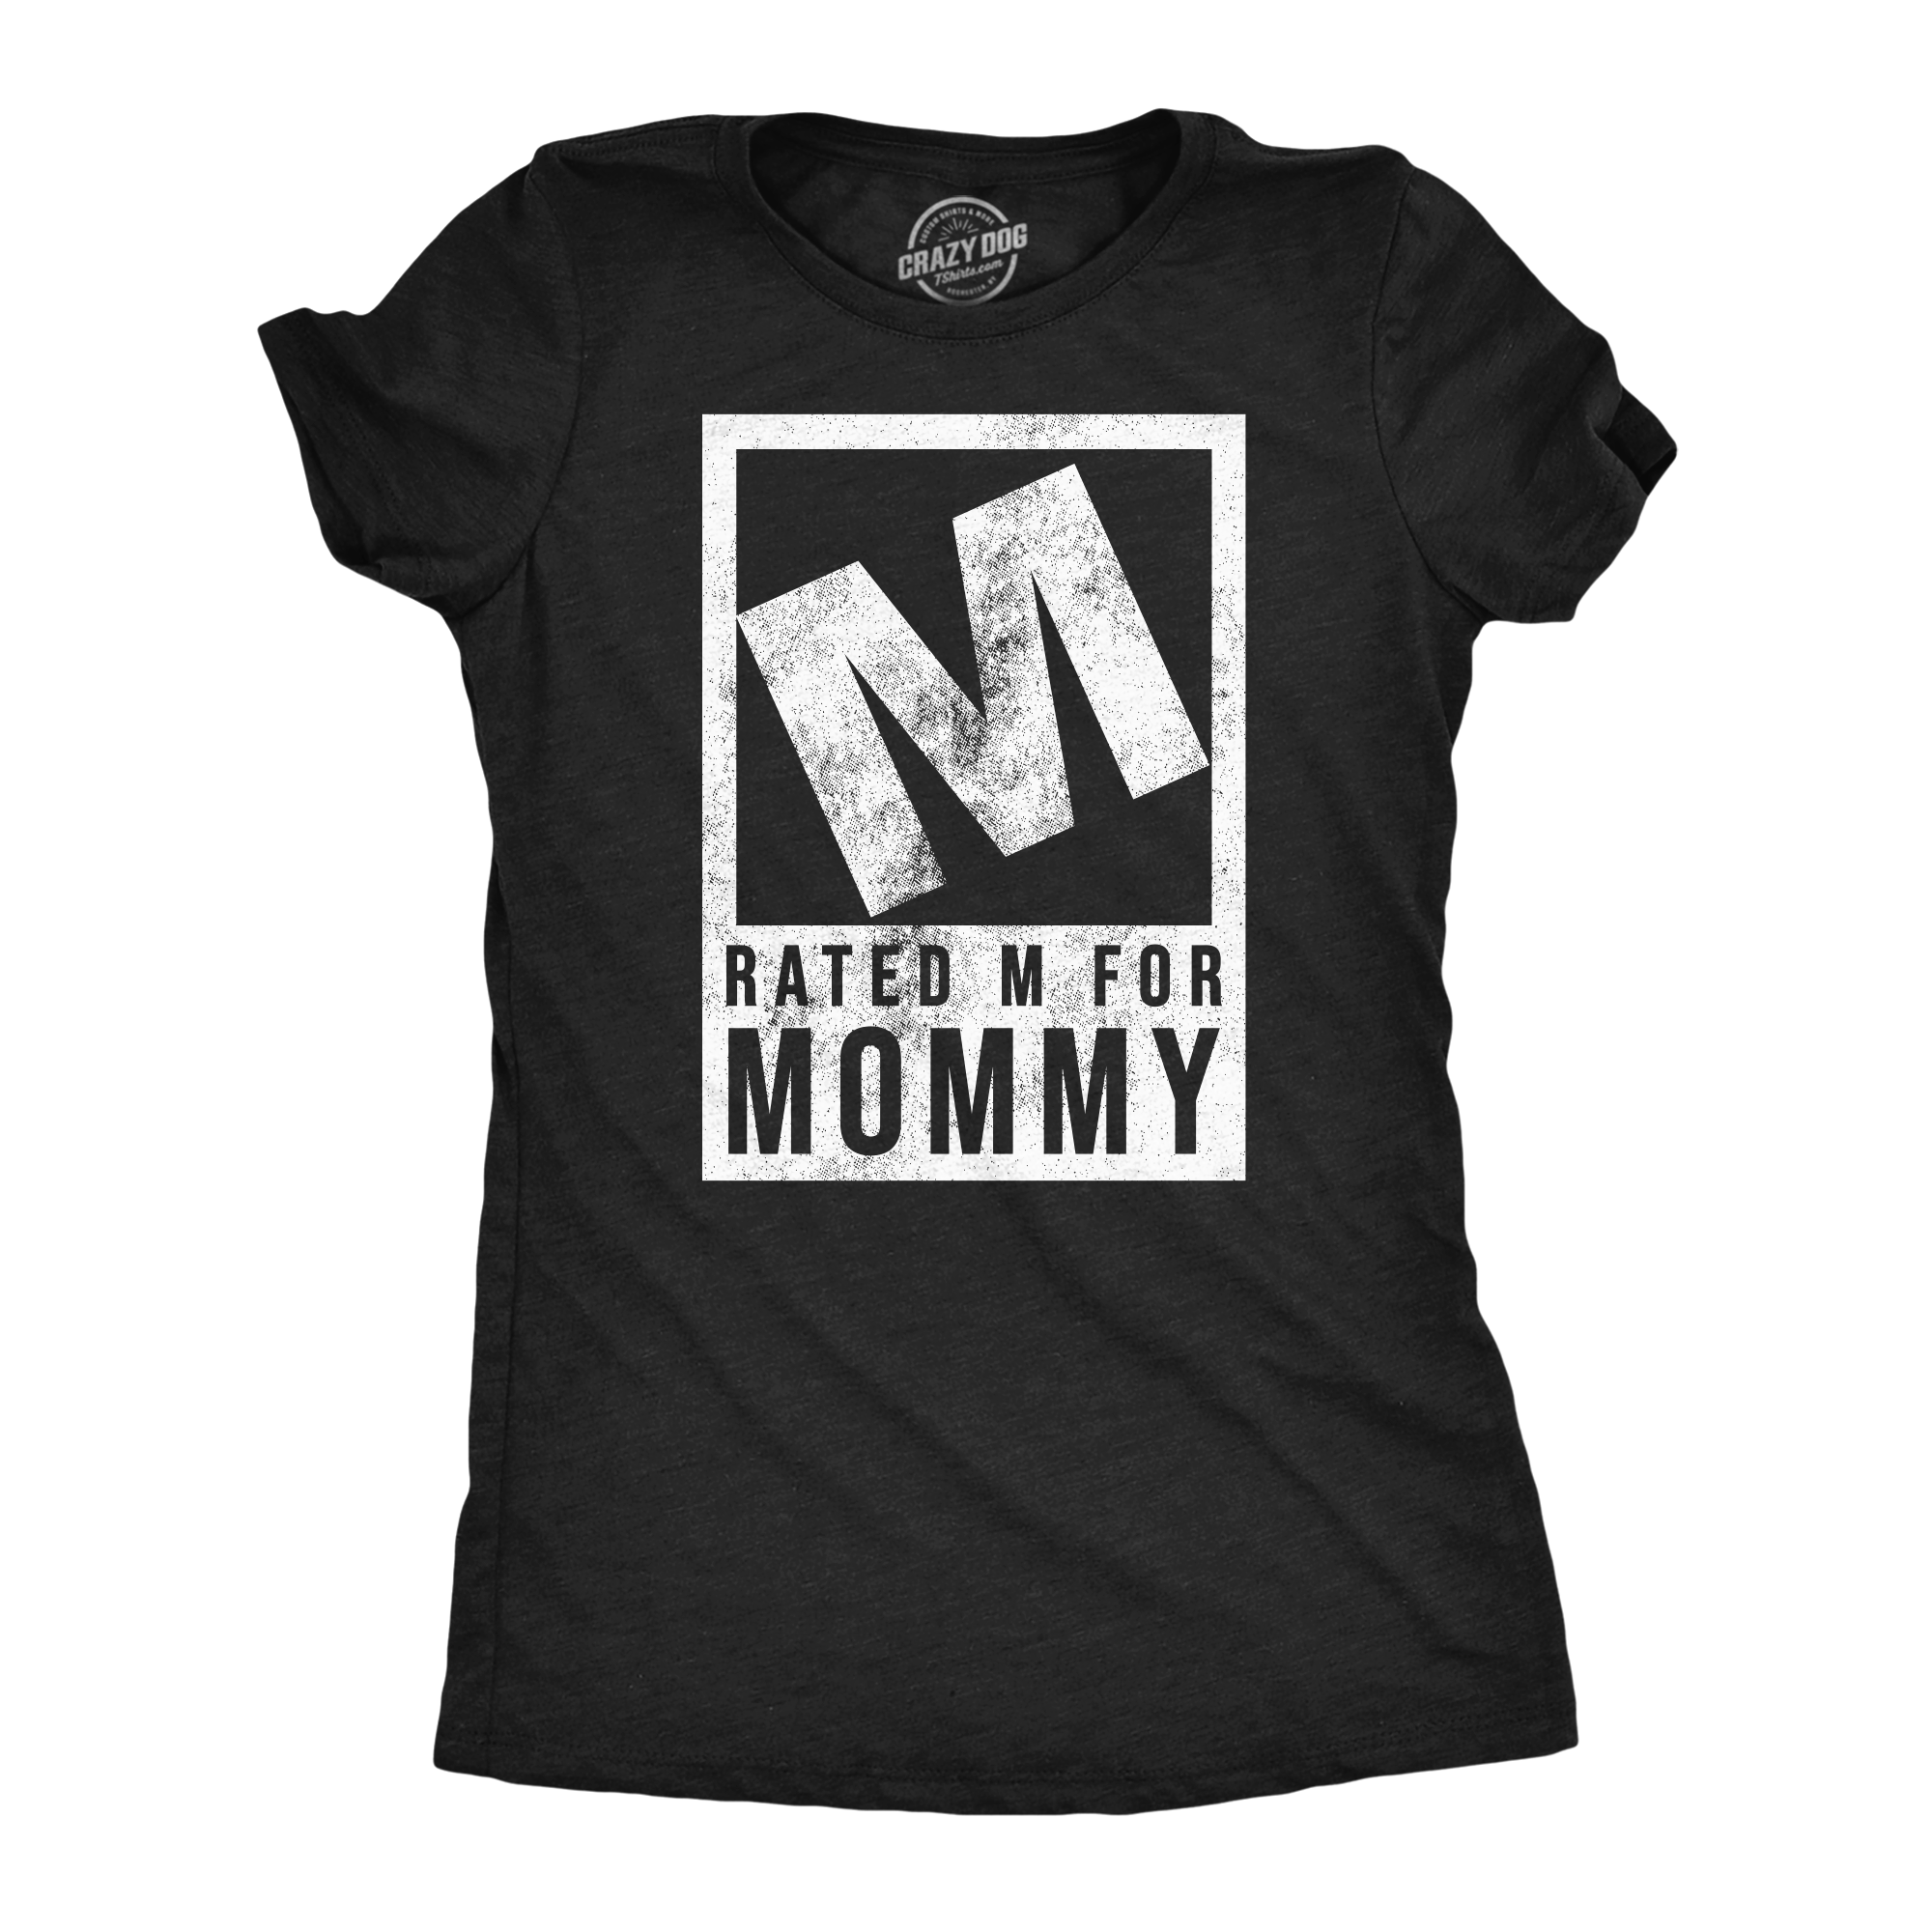 Funny Heather Black - Rated M For Mommy Rated M For Mommy Womens T Shirt Nerdy Mother's Day Video Games sarcastic Tee